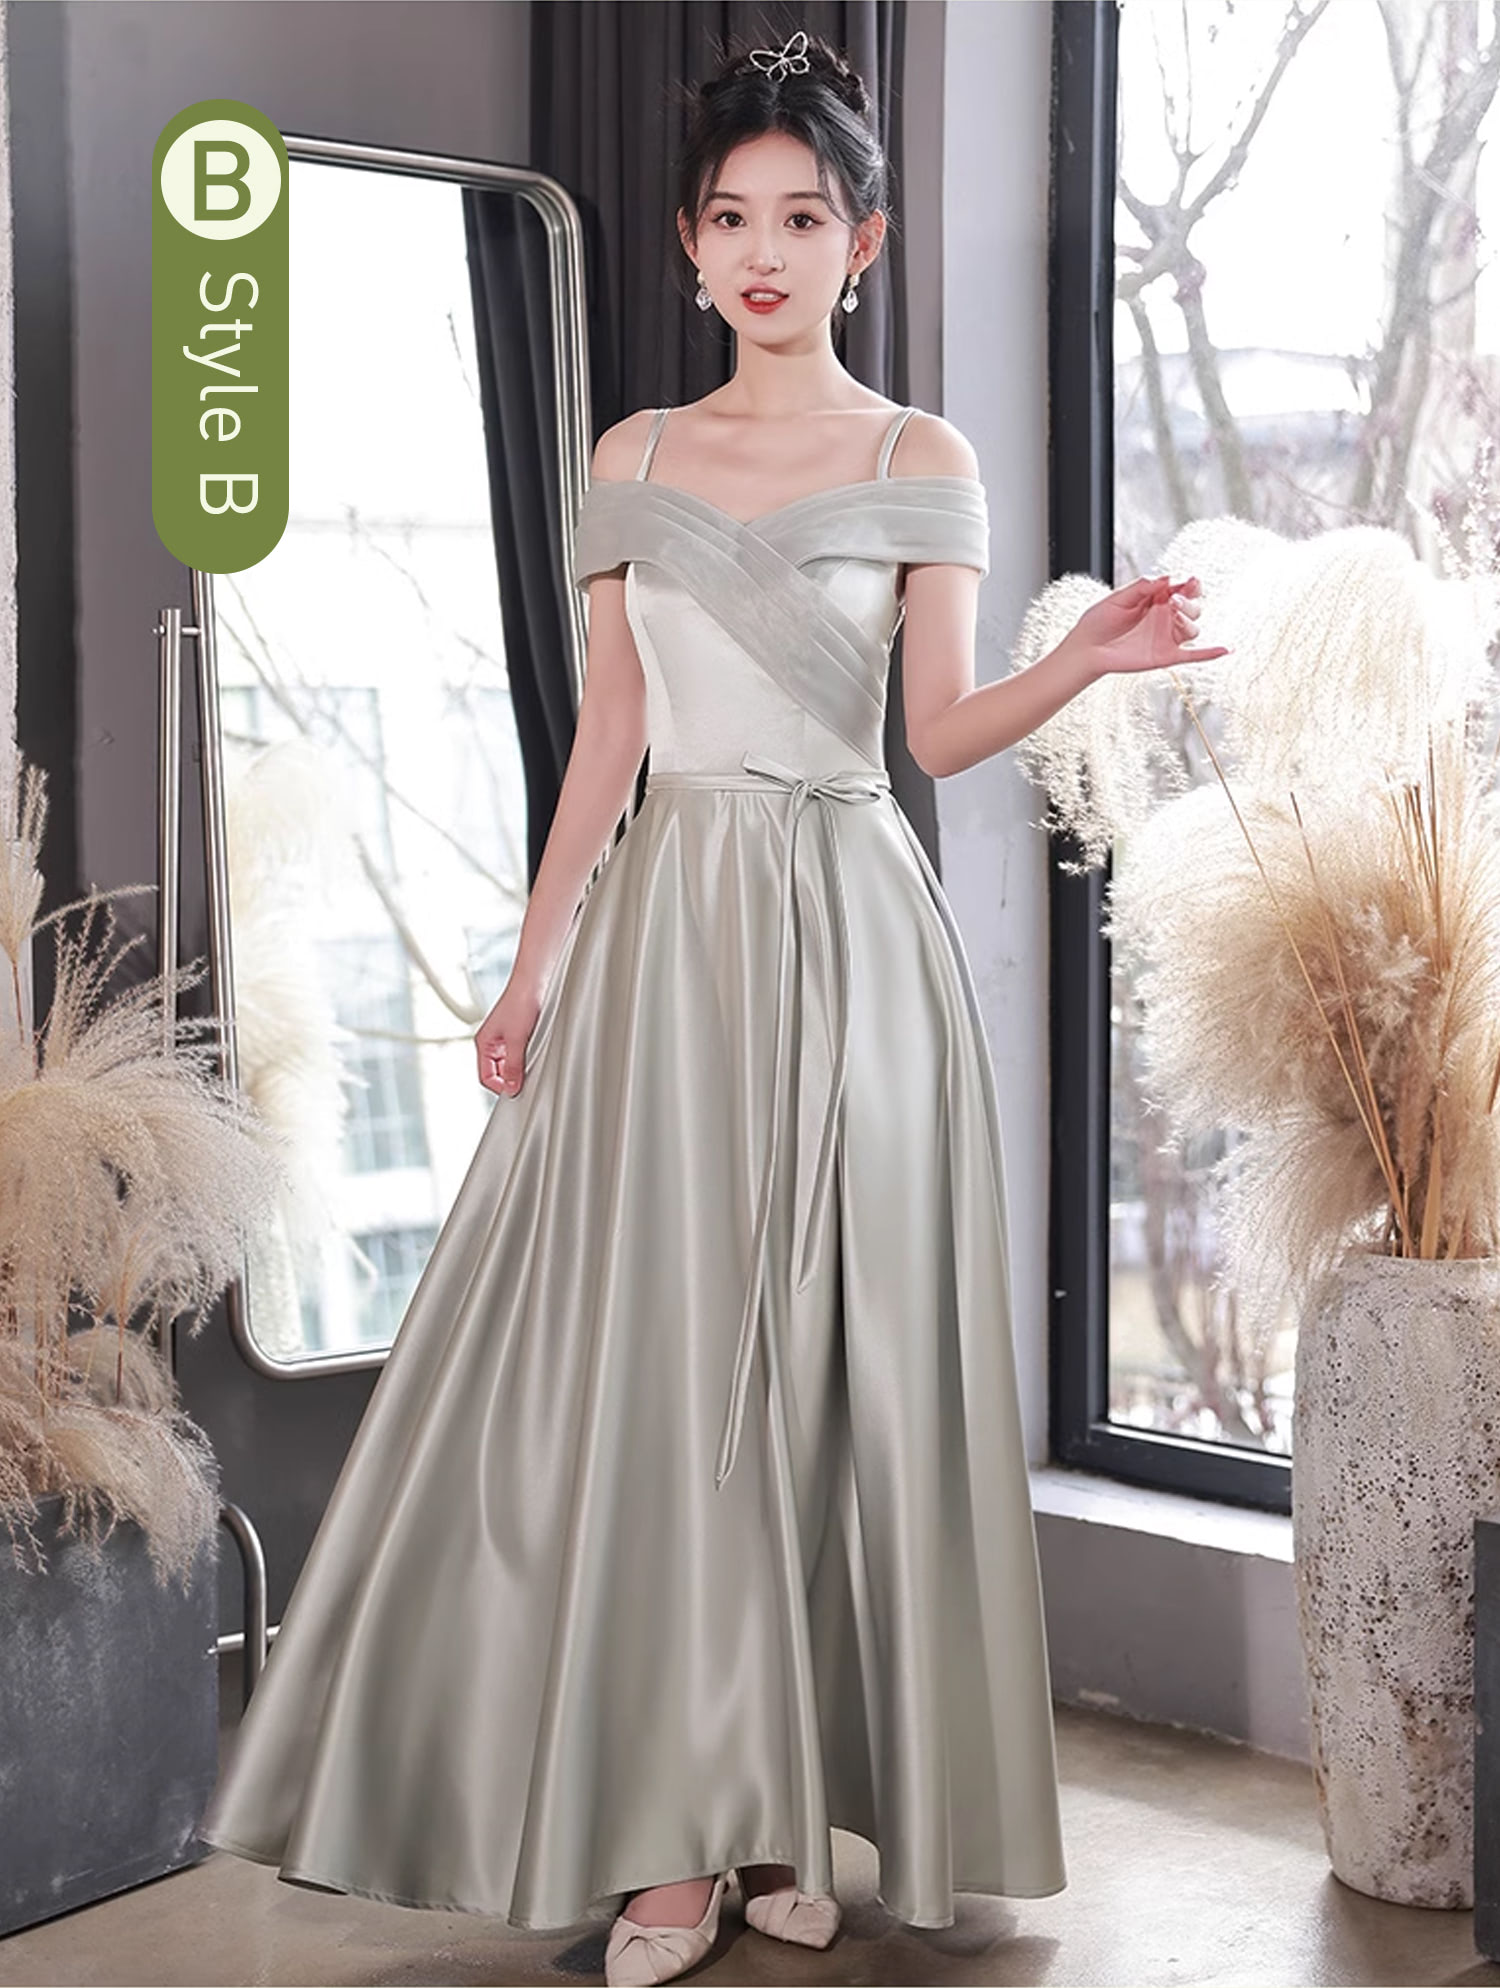 Simple-Gray-Satin-Bridesmaid-Dress-Sweet-Casual-Party-Ball-Gown20